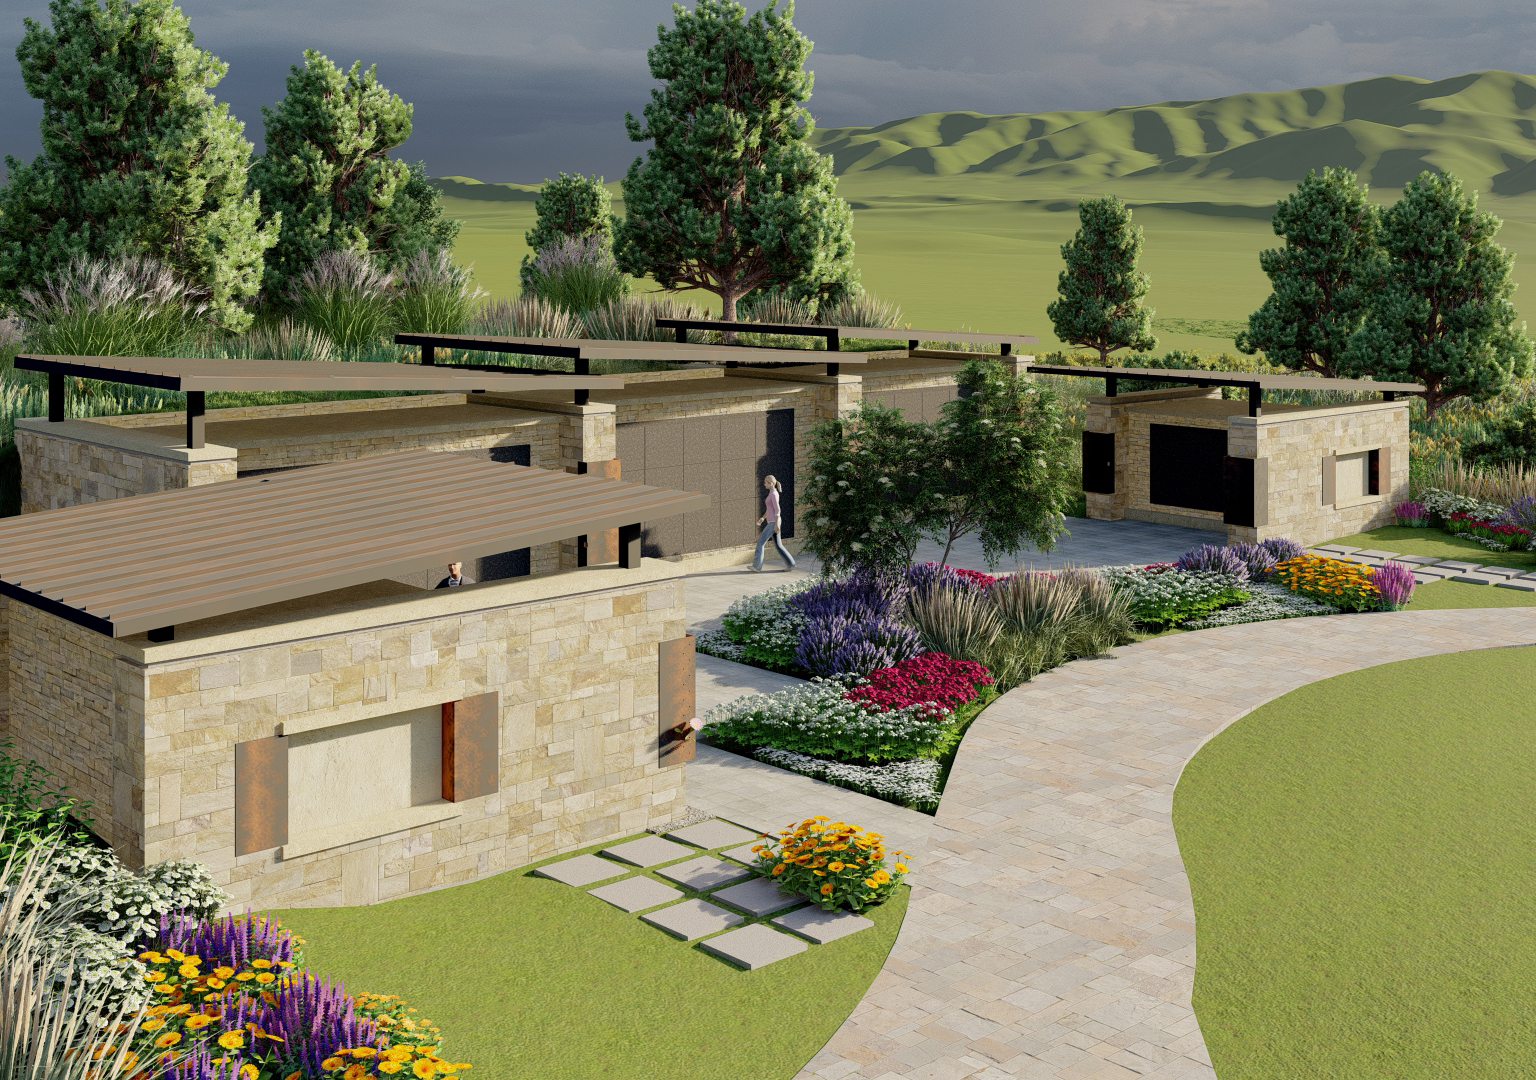 Mausoleum plans at Seven Stones Chatfield, a new age cemetery in Colorado